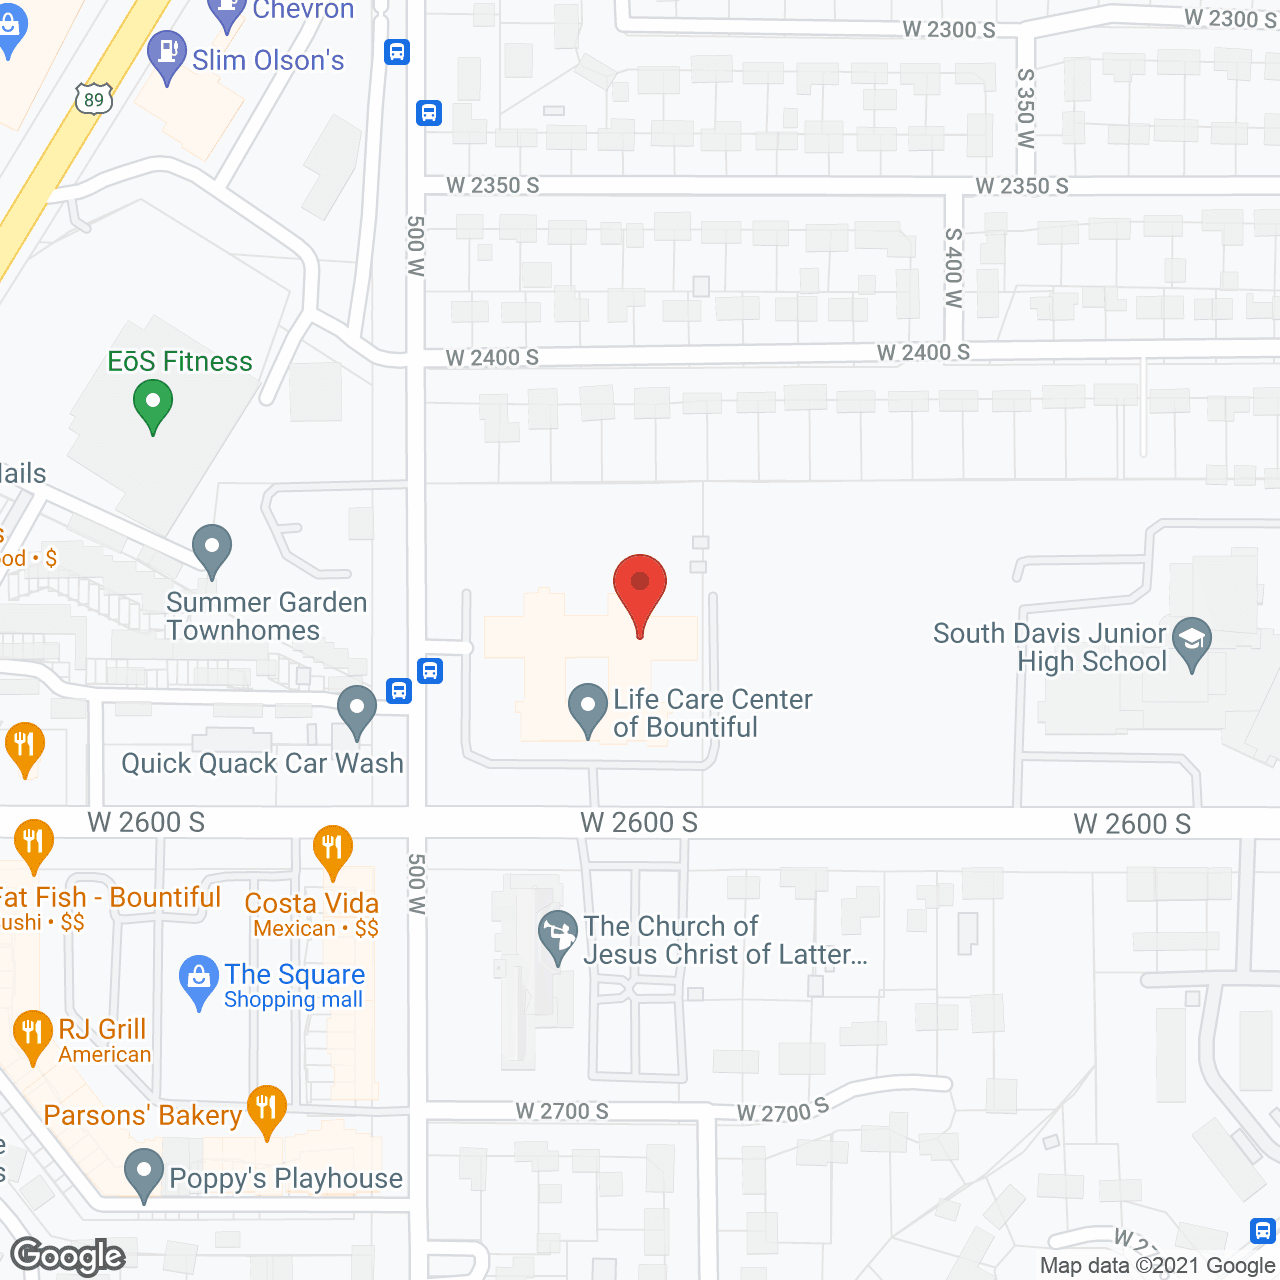 Life Care Ctr of Bountiful in google map